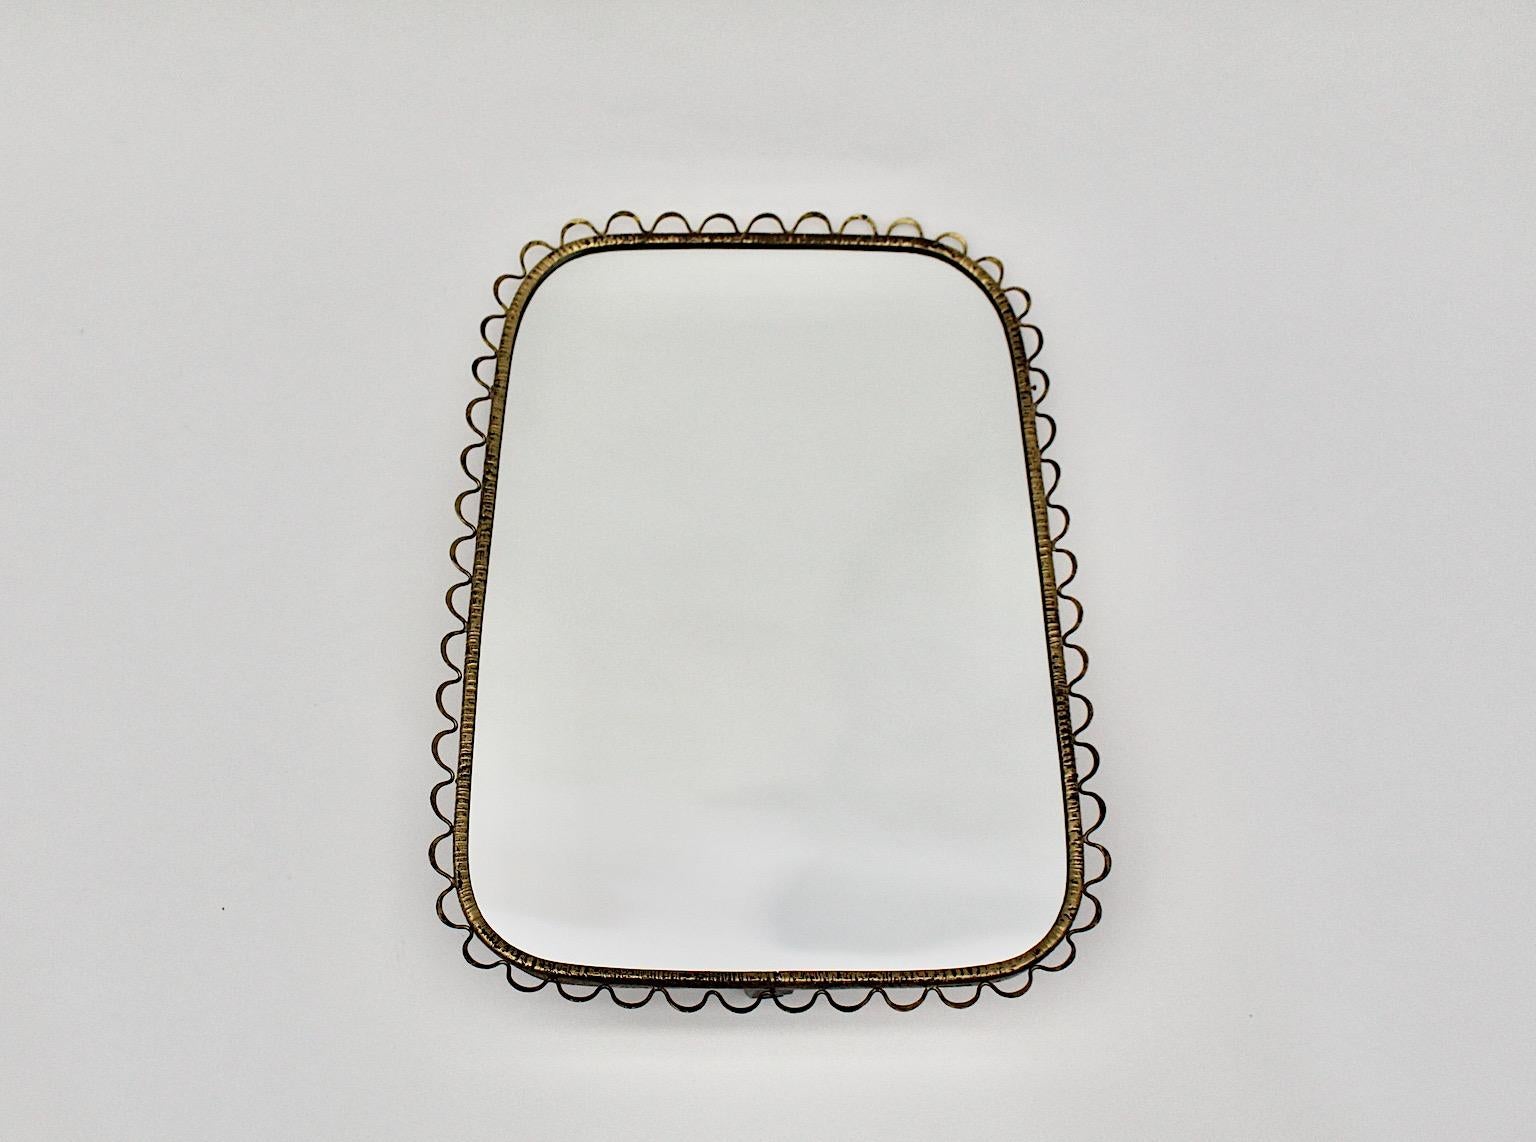 Mid-Century Modern Vintage Rectangular Brass Wall Mirror with Loops 1950s Italy For Sale 3